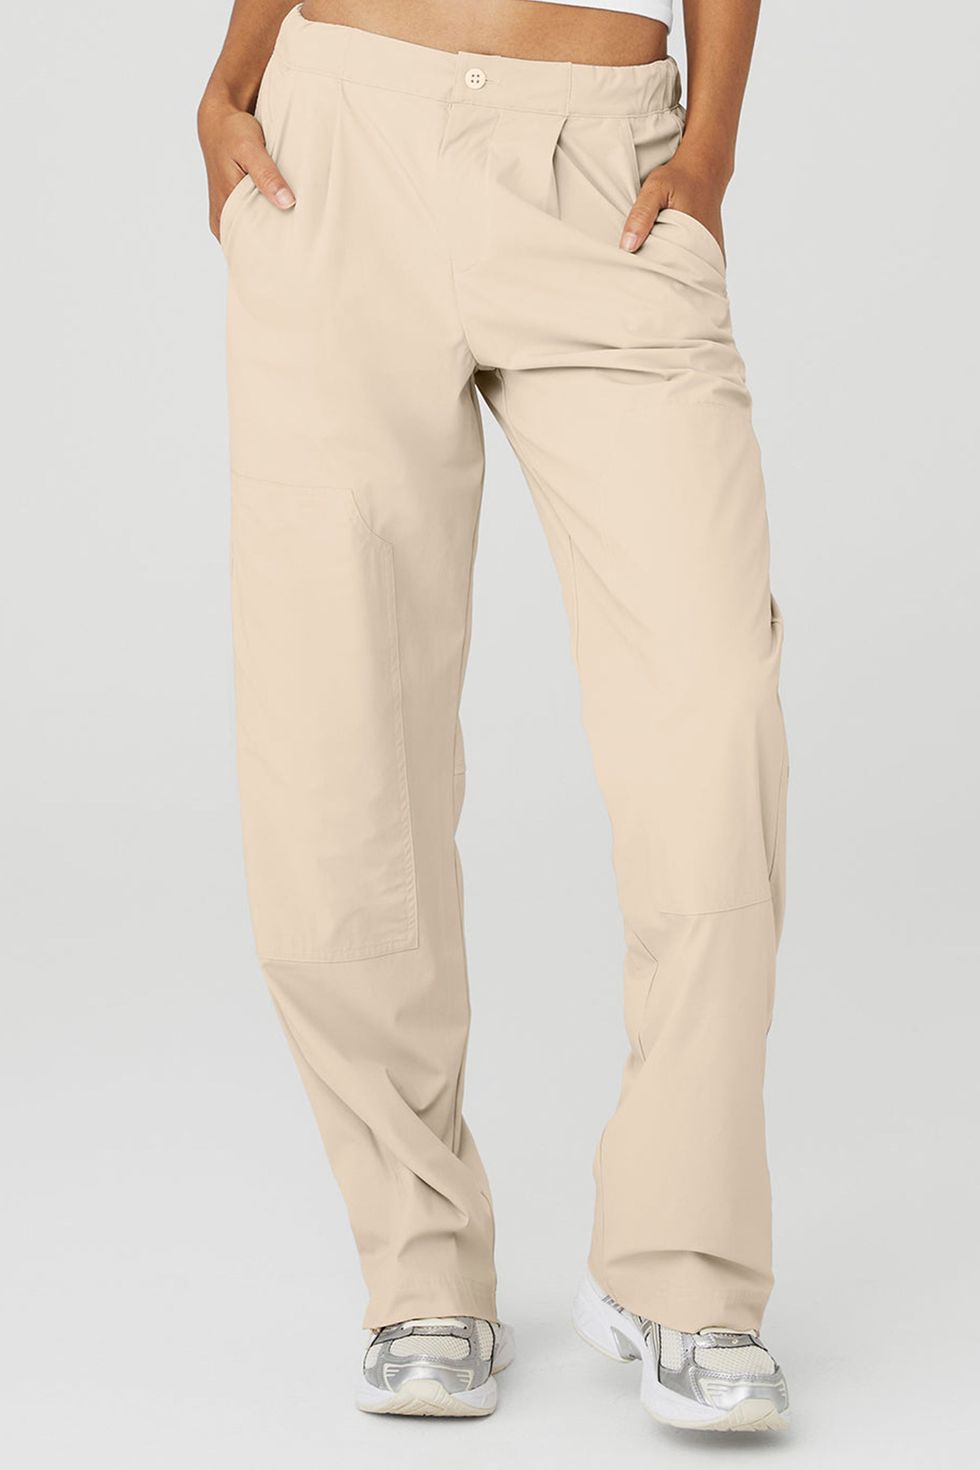 Alo Cargo Pocket Athletic Pants for Women